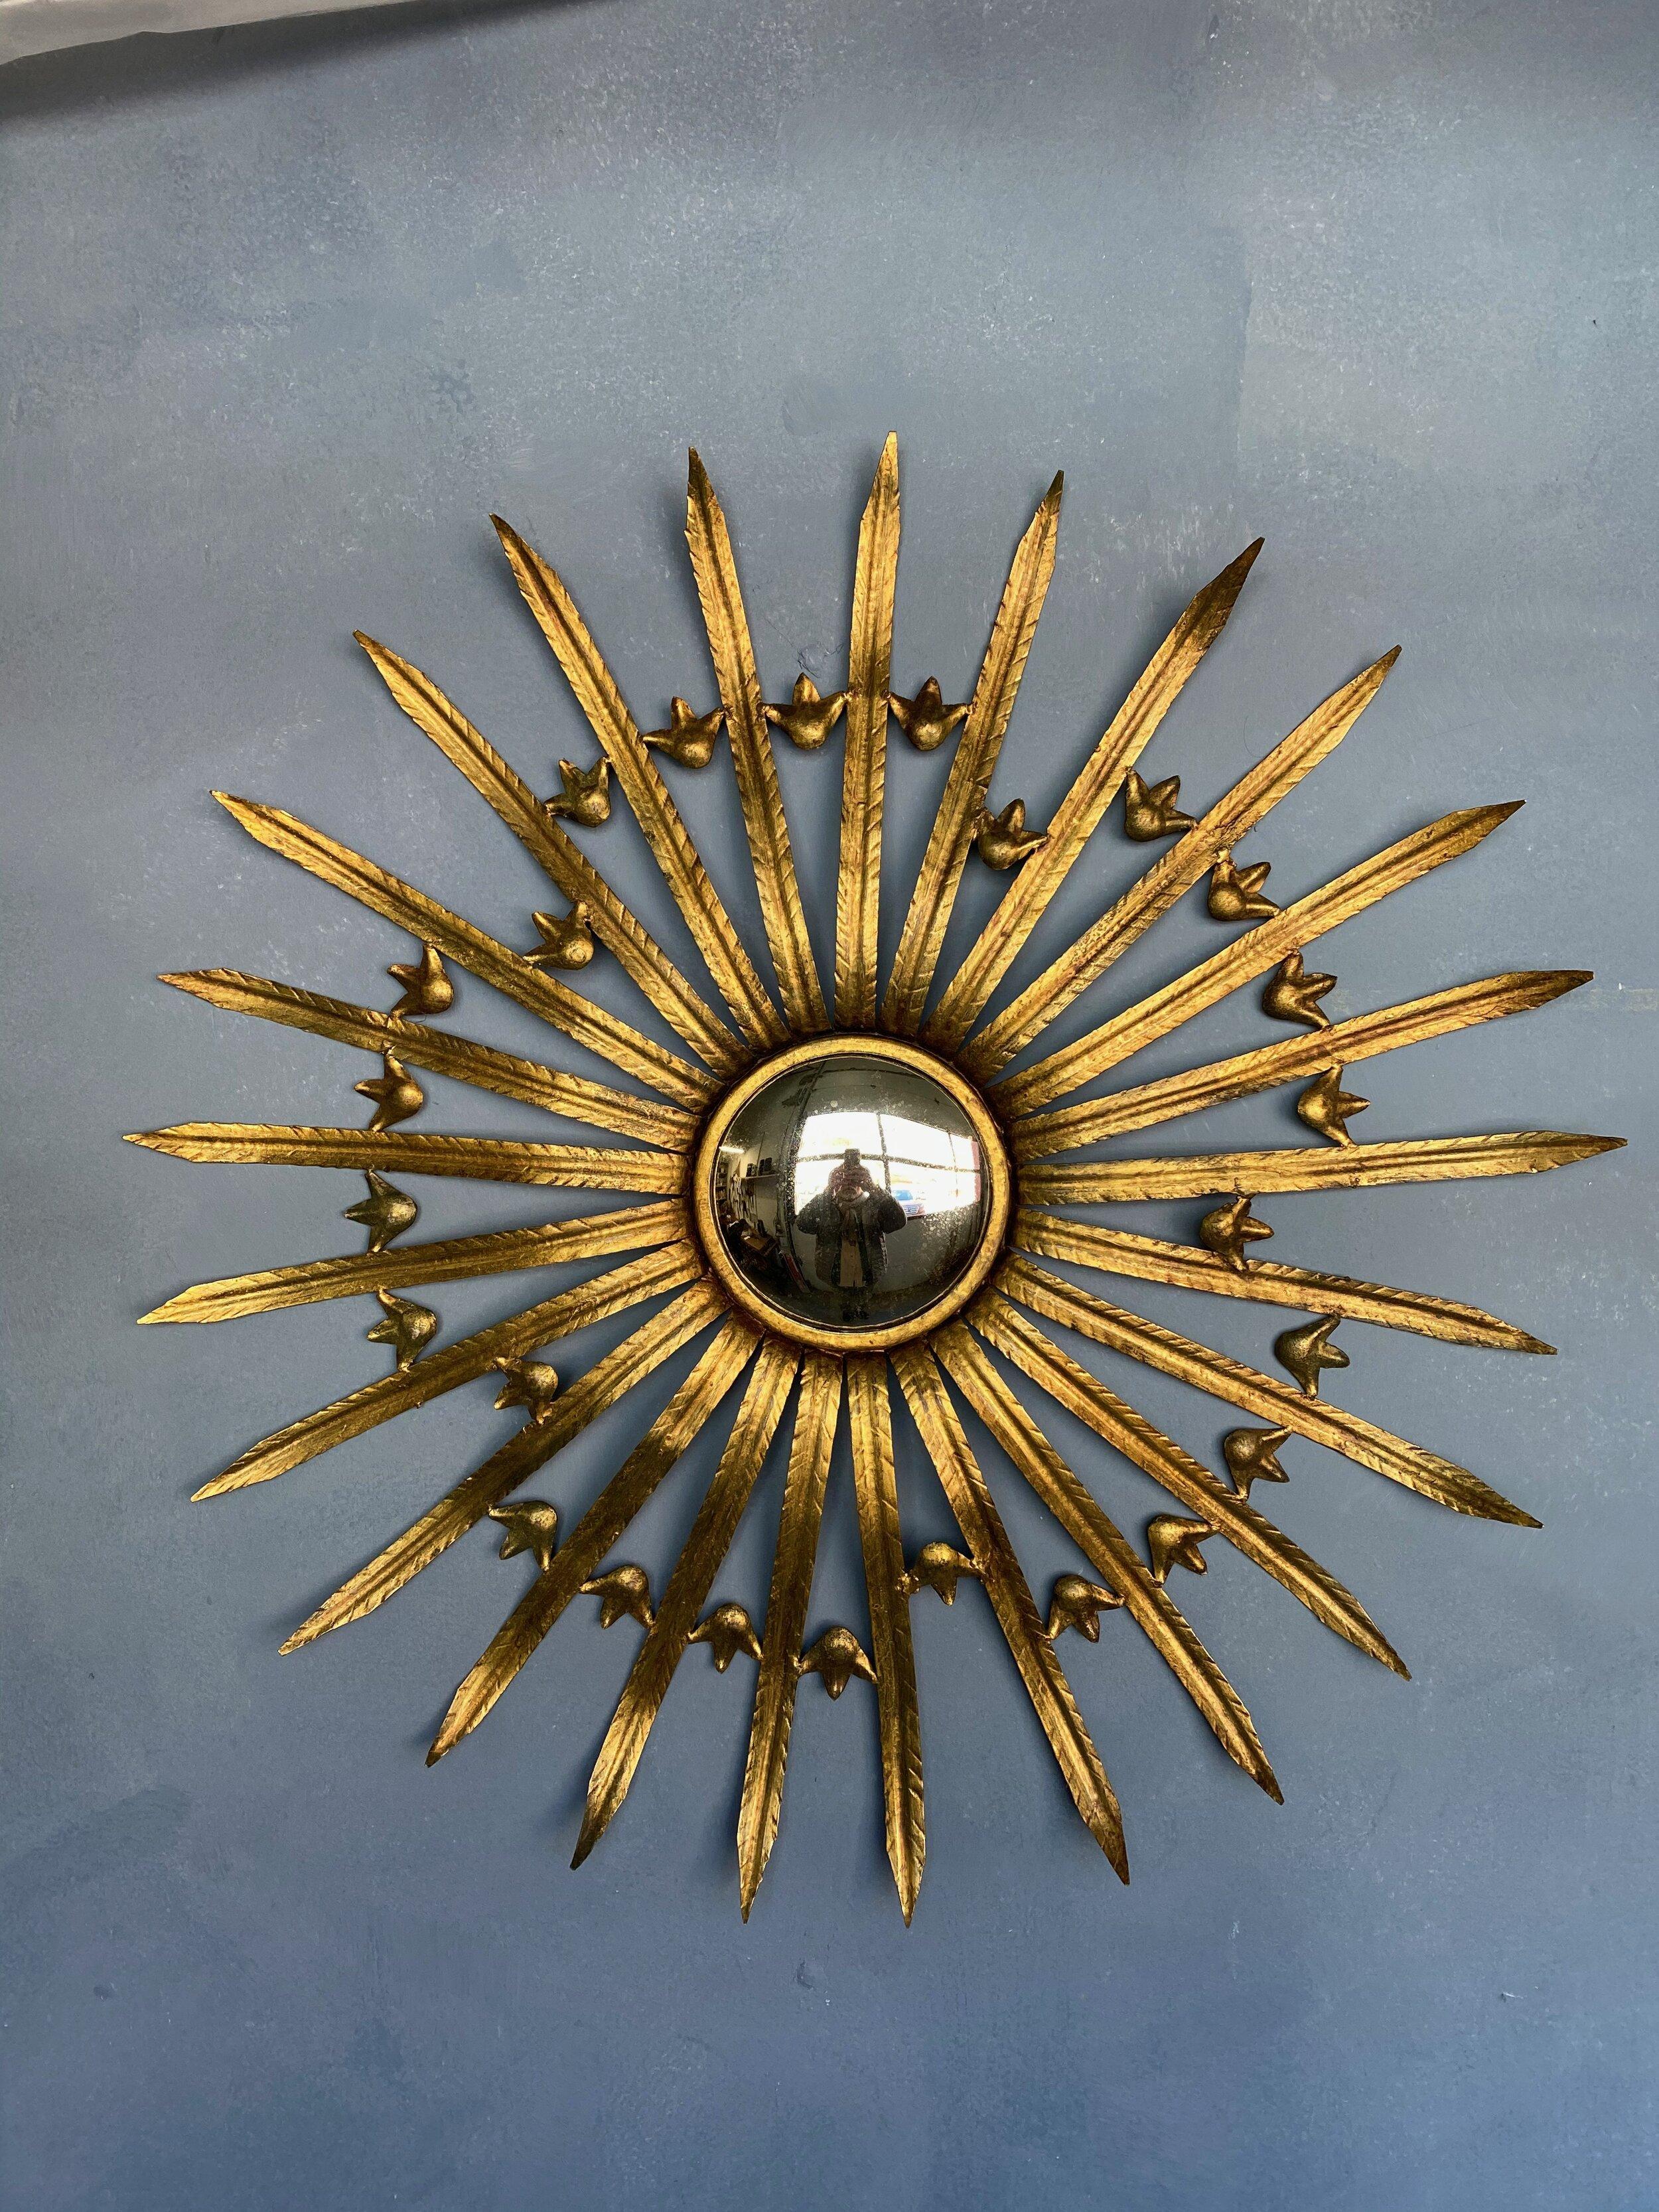 This unique and decorative gilt metal sunburst mirror presents a captivating design. The mirror features pointed rays that are 25 inches long, delicately separated by stylized leaf pattern dividers, creating an intriguing visual effect. The central